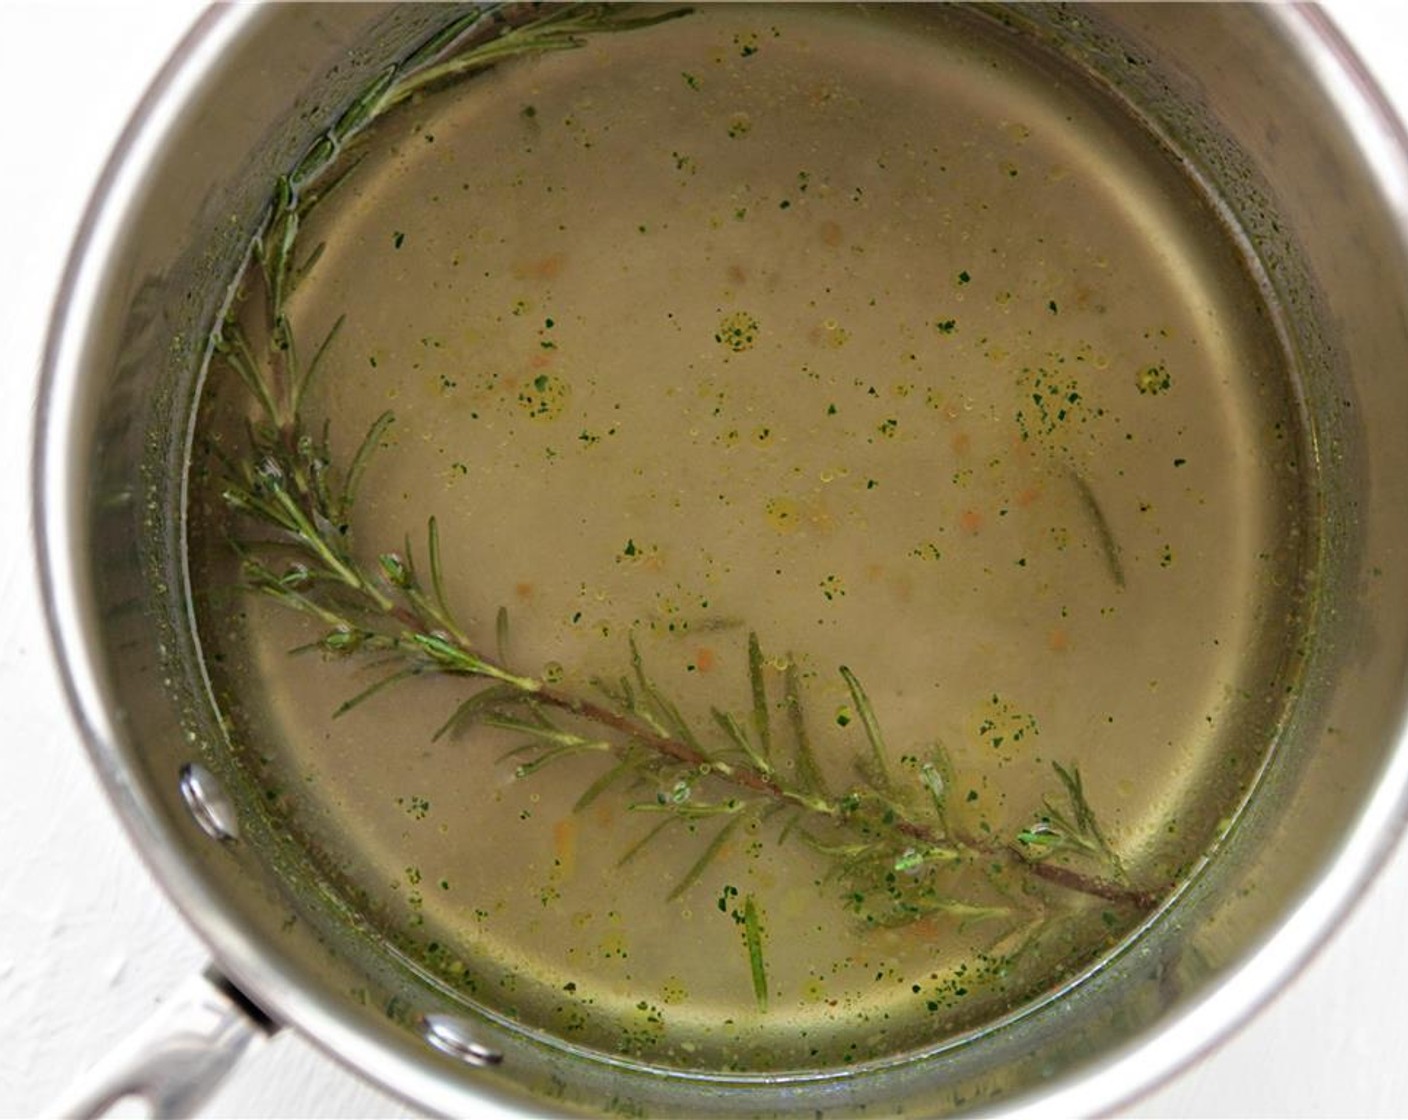 step 1 In a medium sauce pot, combine Vegetable Bouillon Cubes (2) and 3 cups water. Bring to a boil and remove from heat. Add one sprig of fresh Fresh Rosemary (2 sprigs) to broth and set aside.